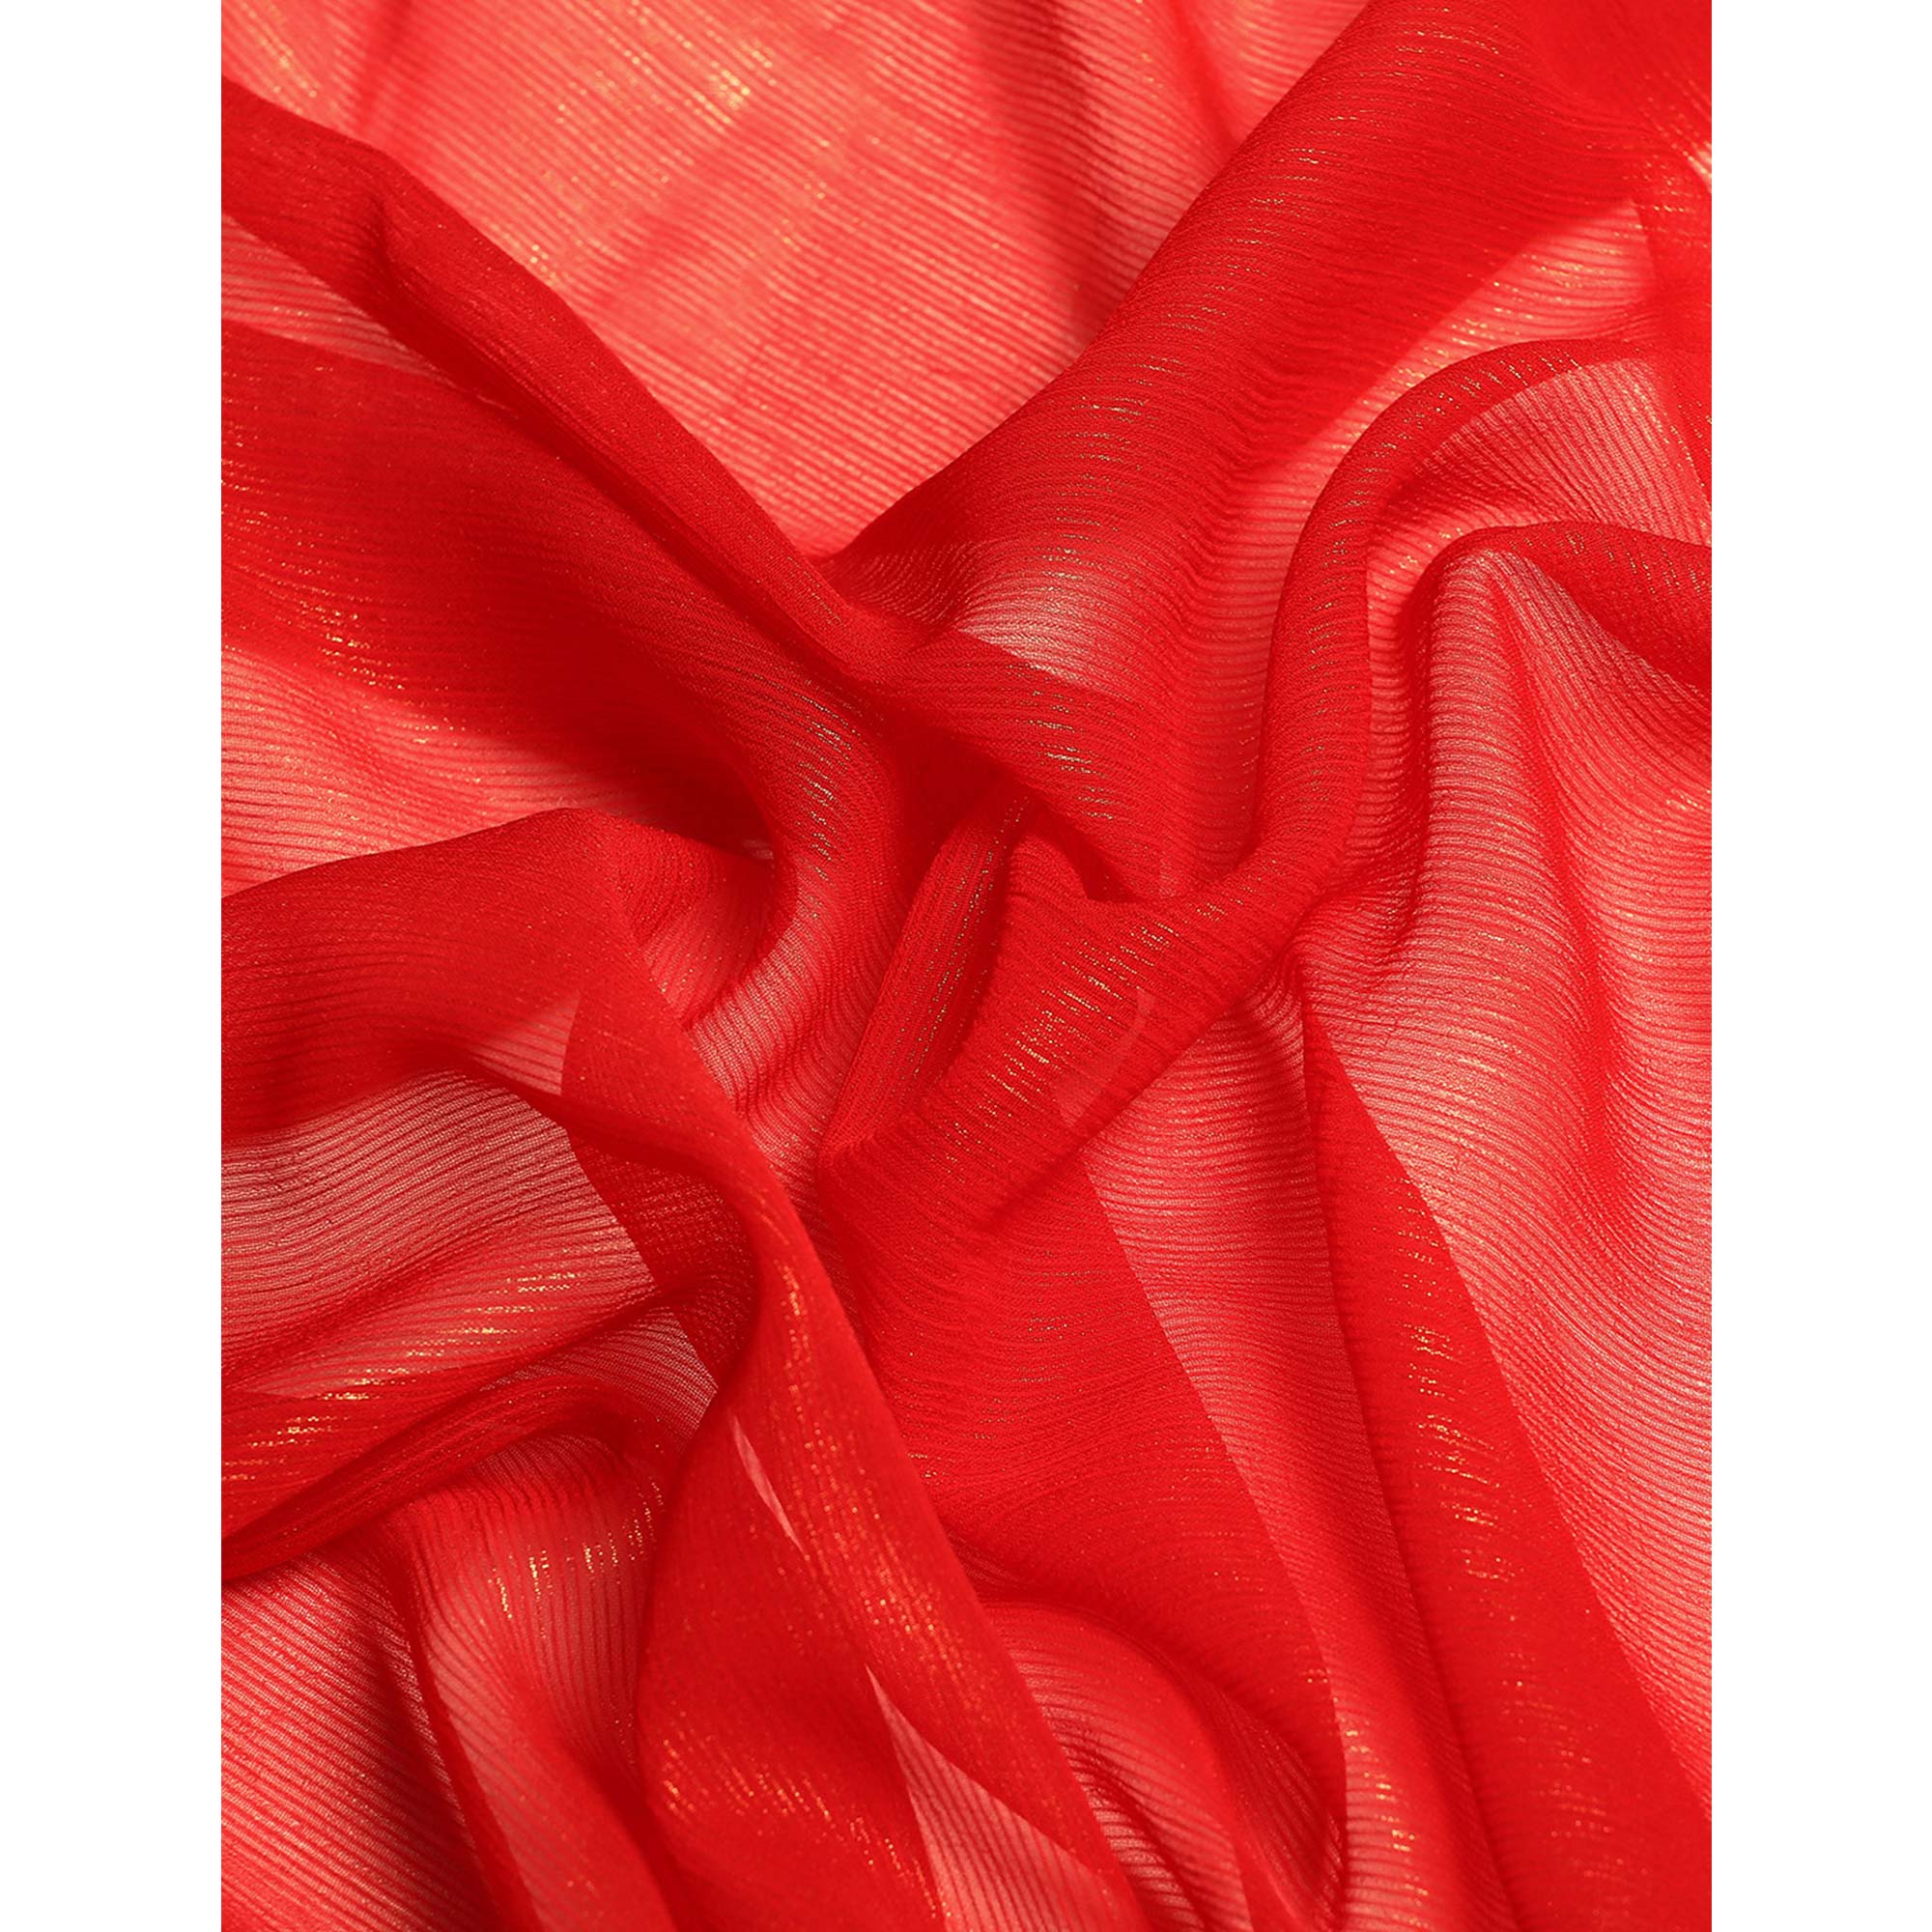 Red Solid With Woven Border Chiffon Saree With Tassels